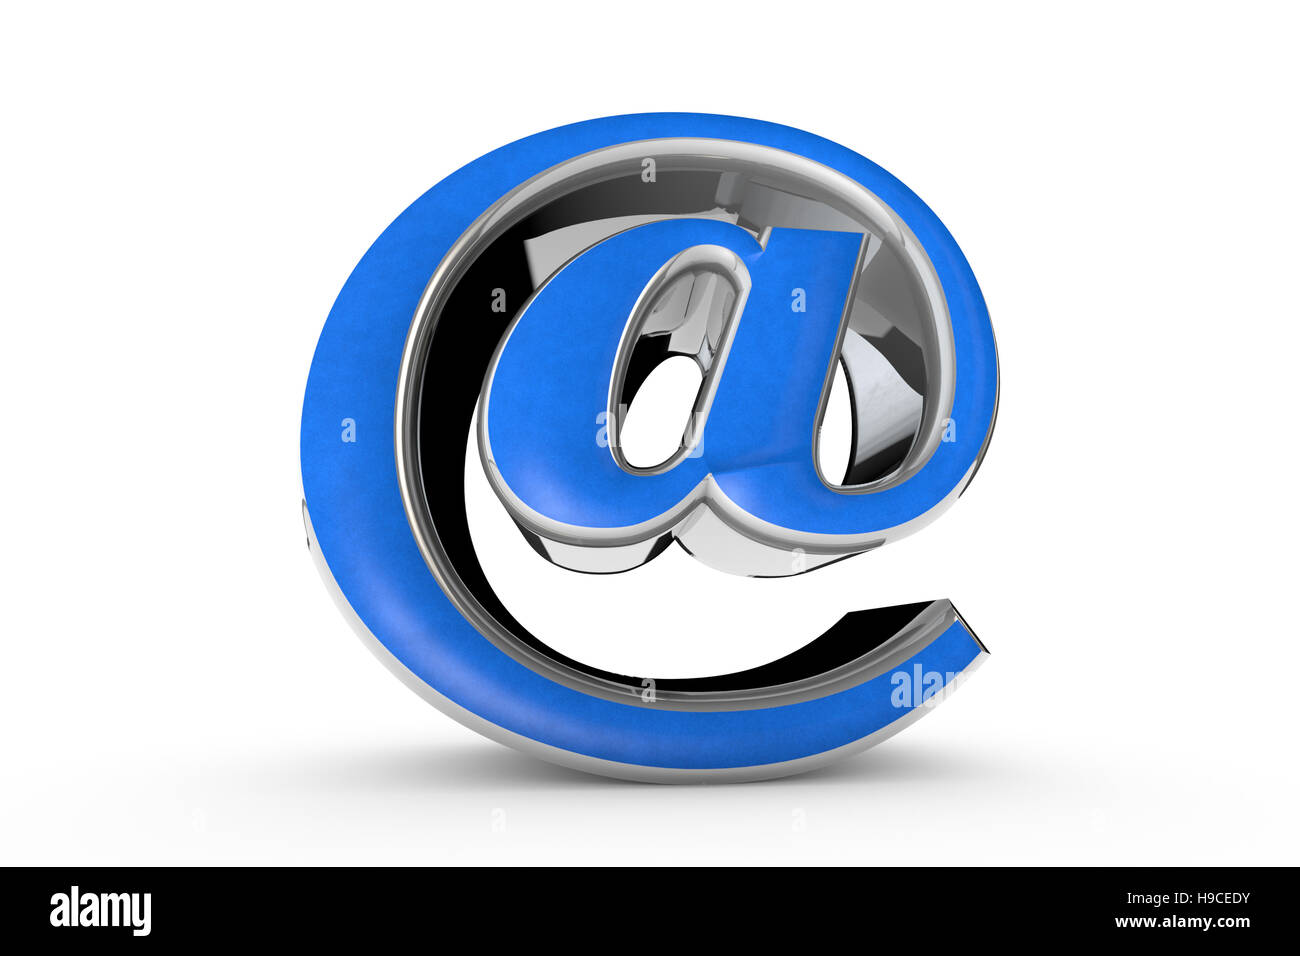 E-mail blue symbol. Isolated over white. Available in high-resolution and several sizes to fit the needs of your project. 3D illustration rendering. Stock Photo